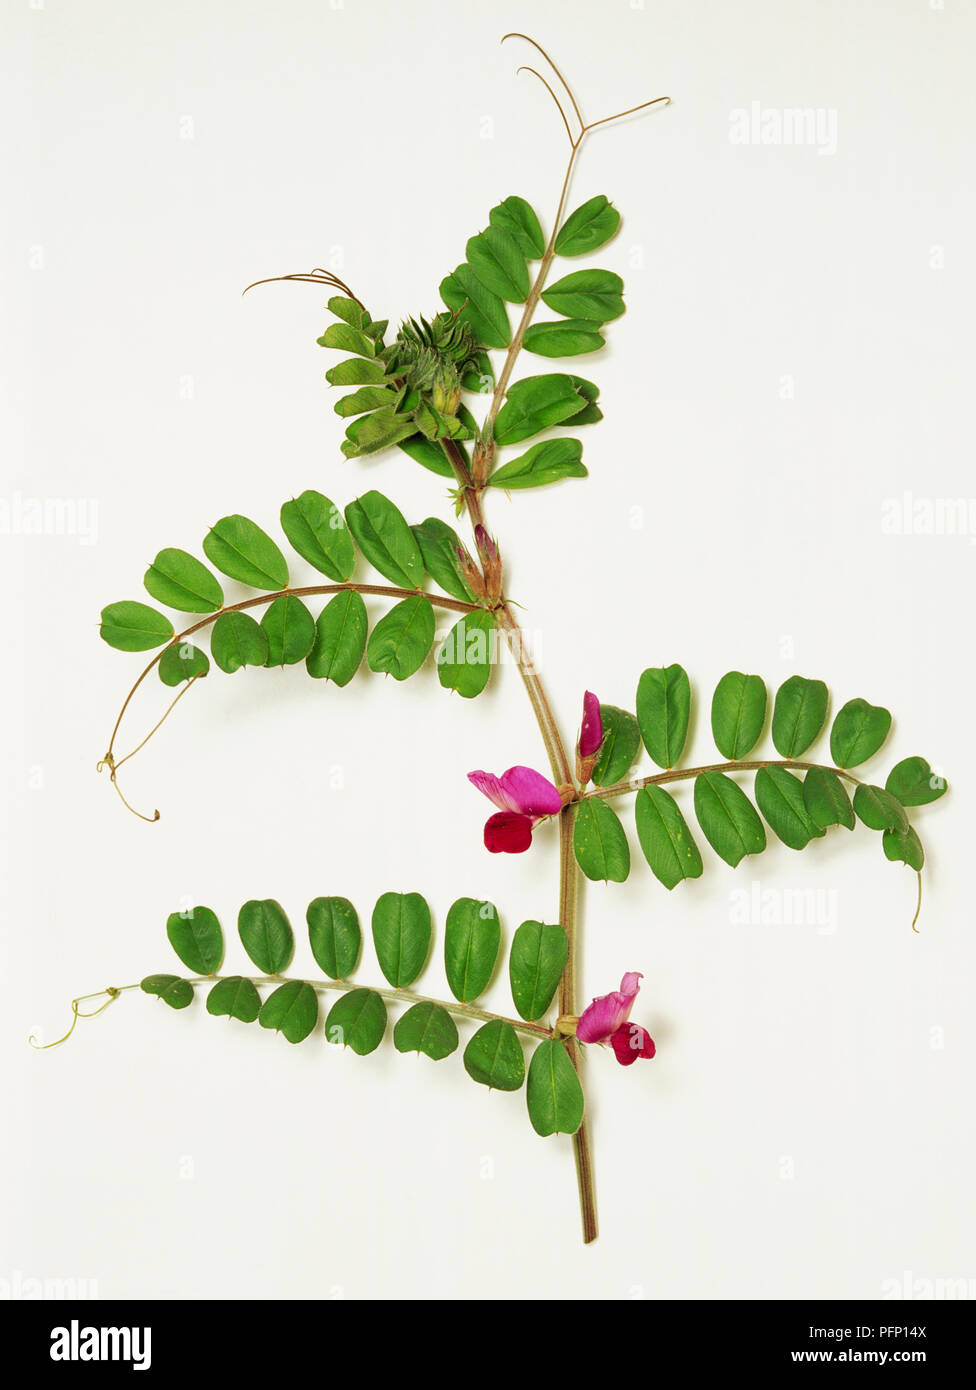 Vicia sativa, common vetch, stem with forked tendrils at the tip of the green opposite leaves, purple flowers growing in the leaf axils. Stock Photo